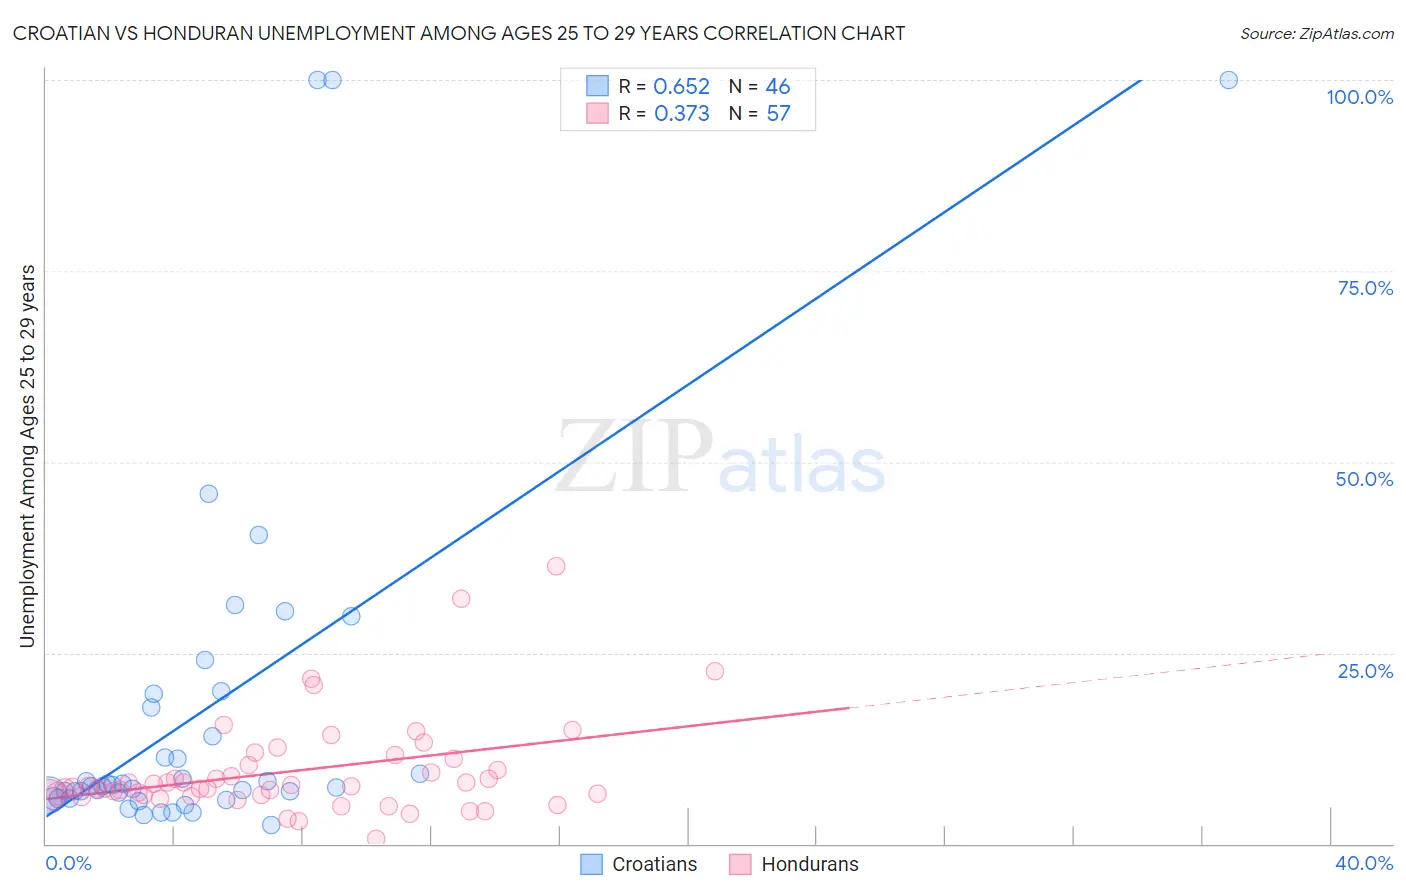 Croatian vs Honduran Unemployment Among Ages 25 to 29 years